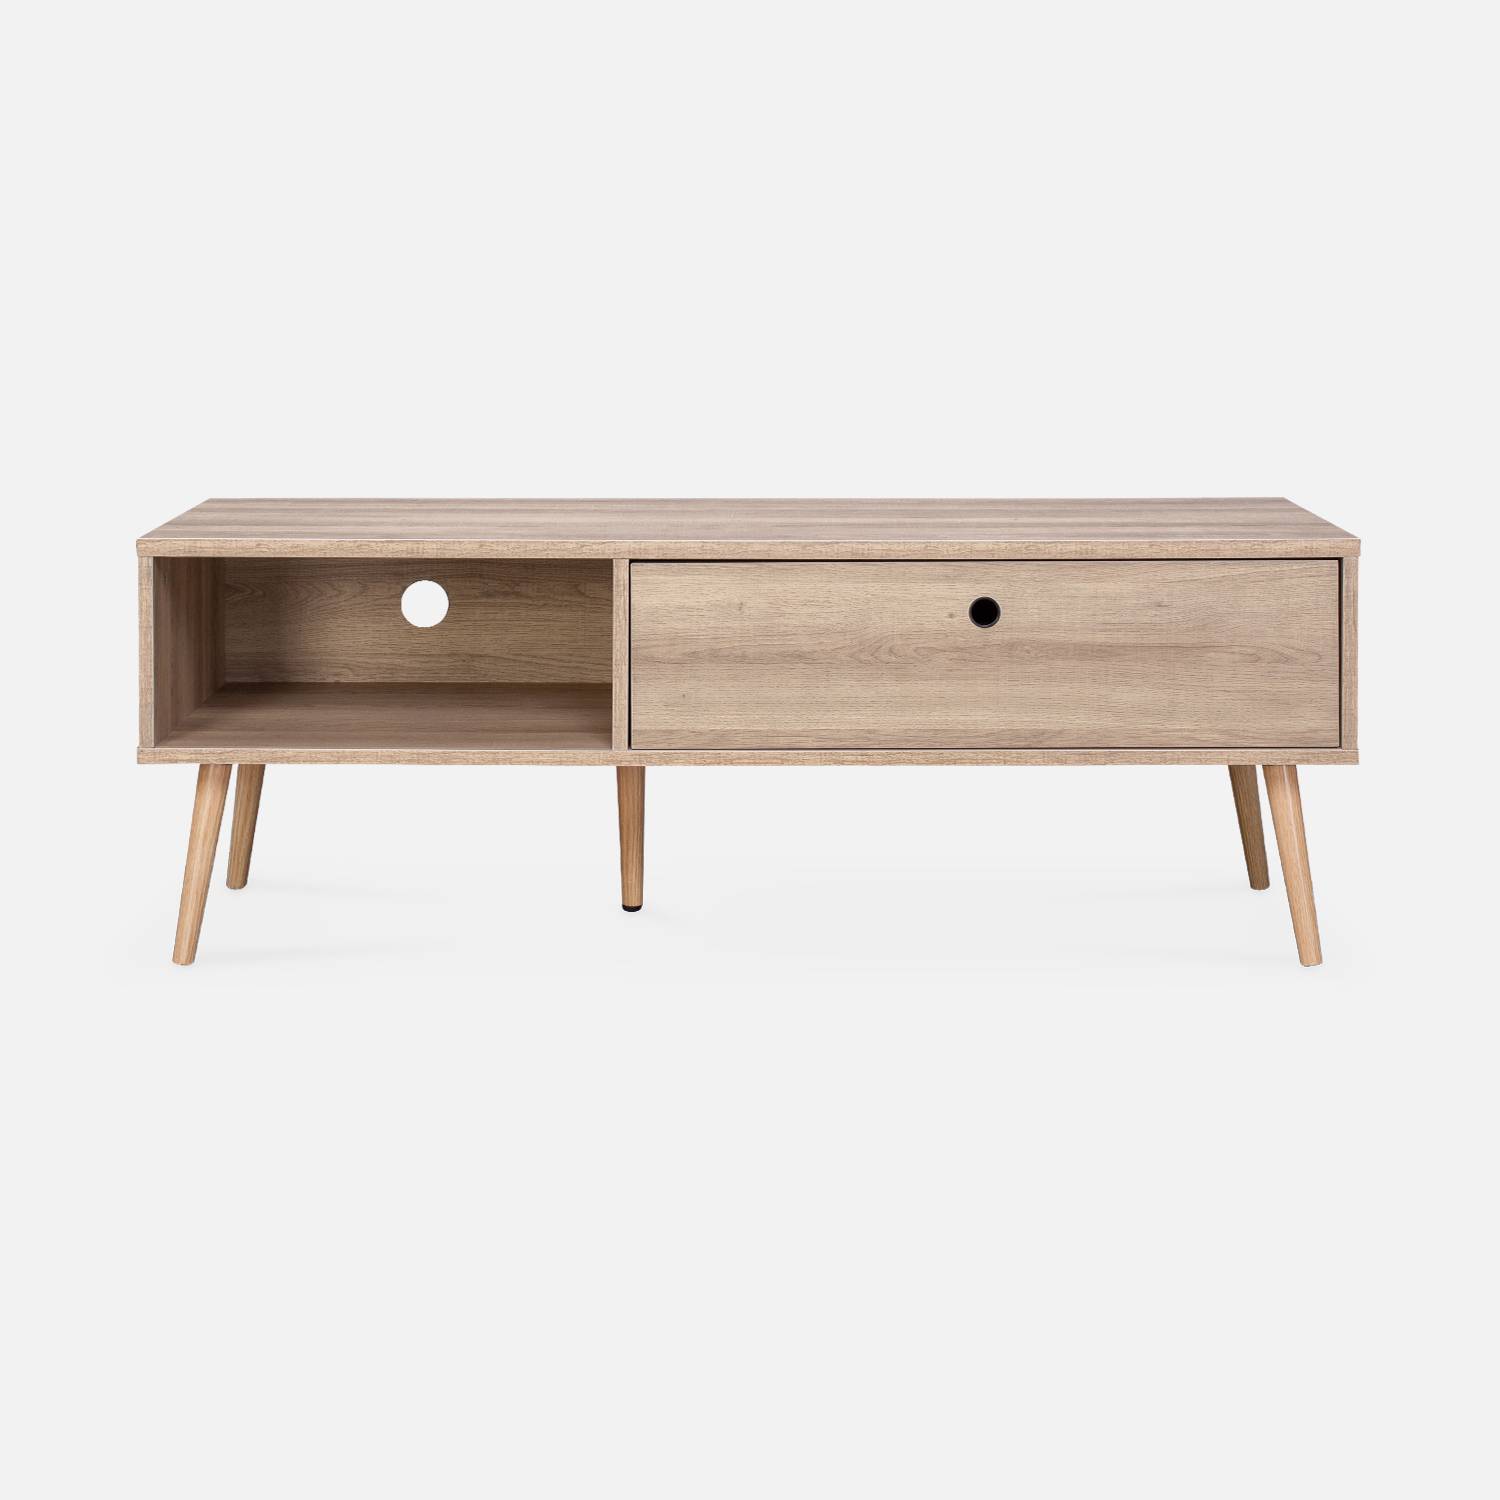 Scandinavian-style wood-effect TV stand with two storage spaces, 120x39x43cm - Scandi - Natural,sweeek,Photo4